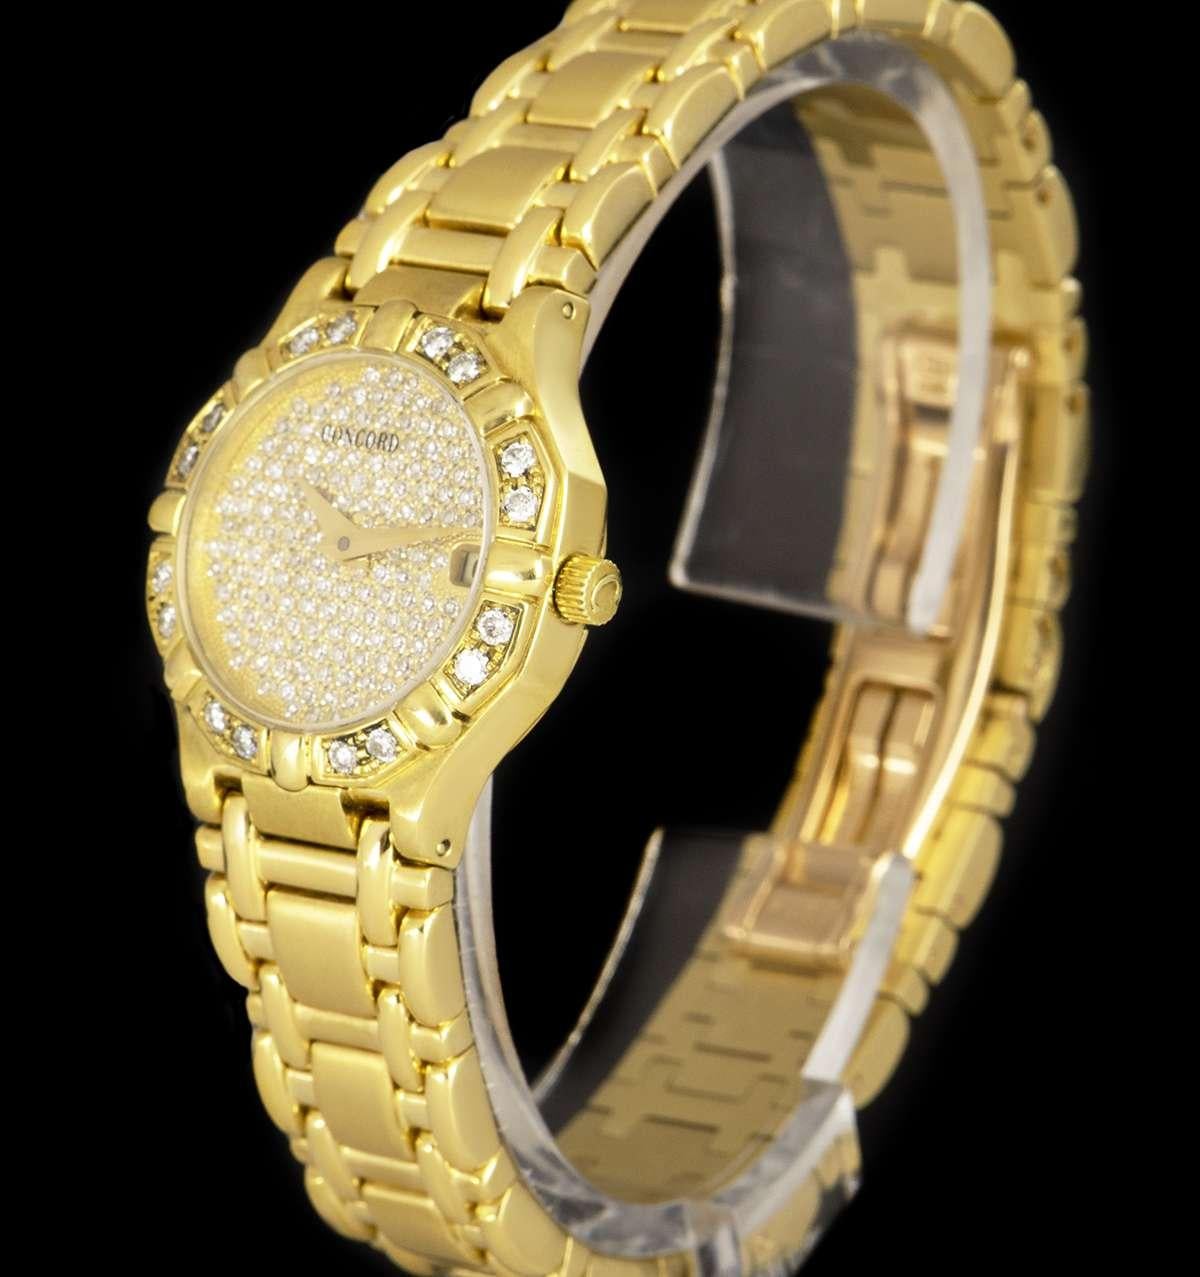 An 18k Yellow Gold Saratoga Ladies Wristwatch, pave diamond dial, date at 3 0'clock, a fixed 18k yellow gold bezel set with approximately 16 round brilliant cut diamonds (~0.22ct), an 18k yellow gold bracelet with a concealed 18k gold double